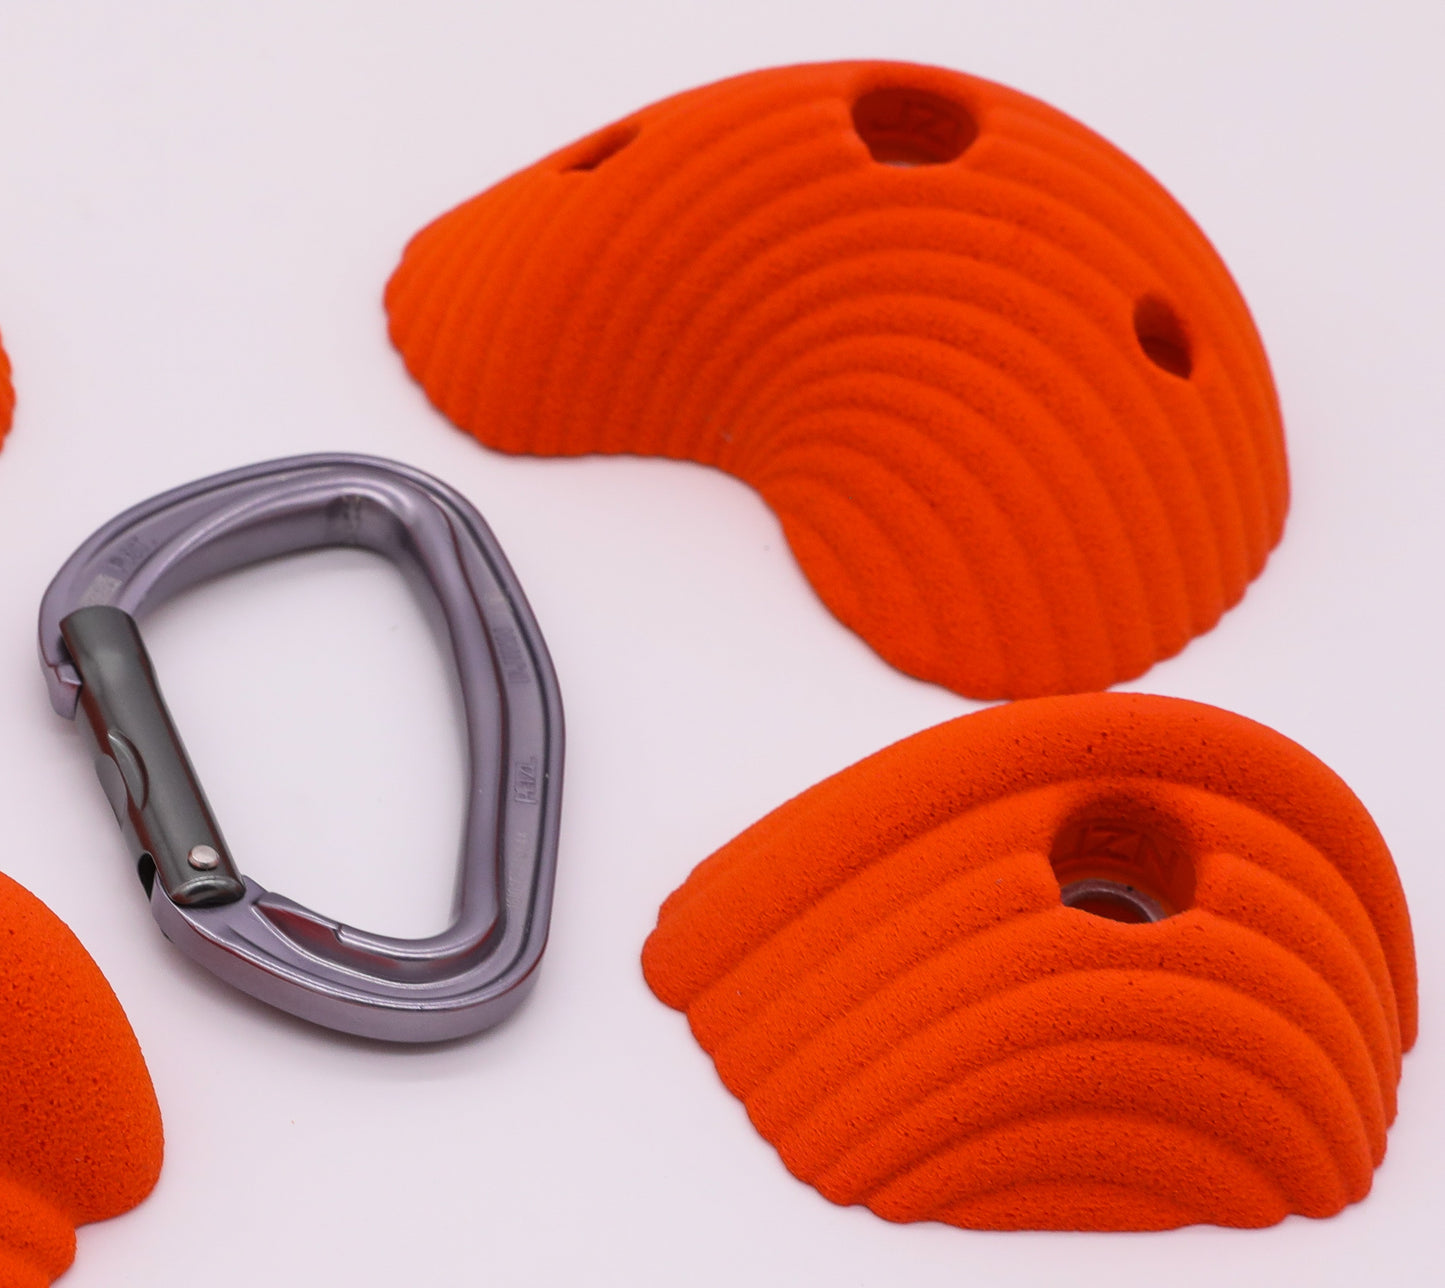 Bolt On Climbing Holds, Large Swarm Foot Holds / Mini Slopers